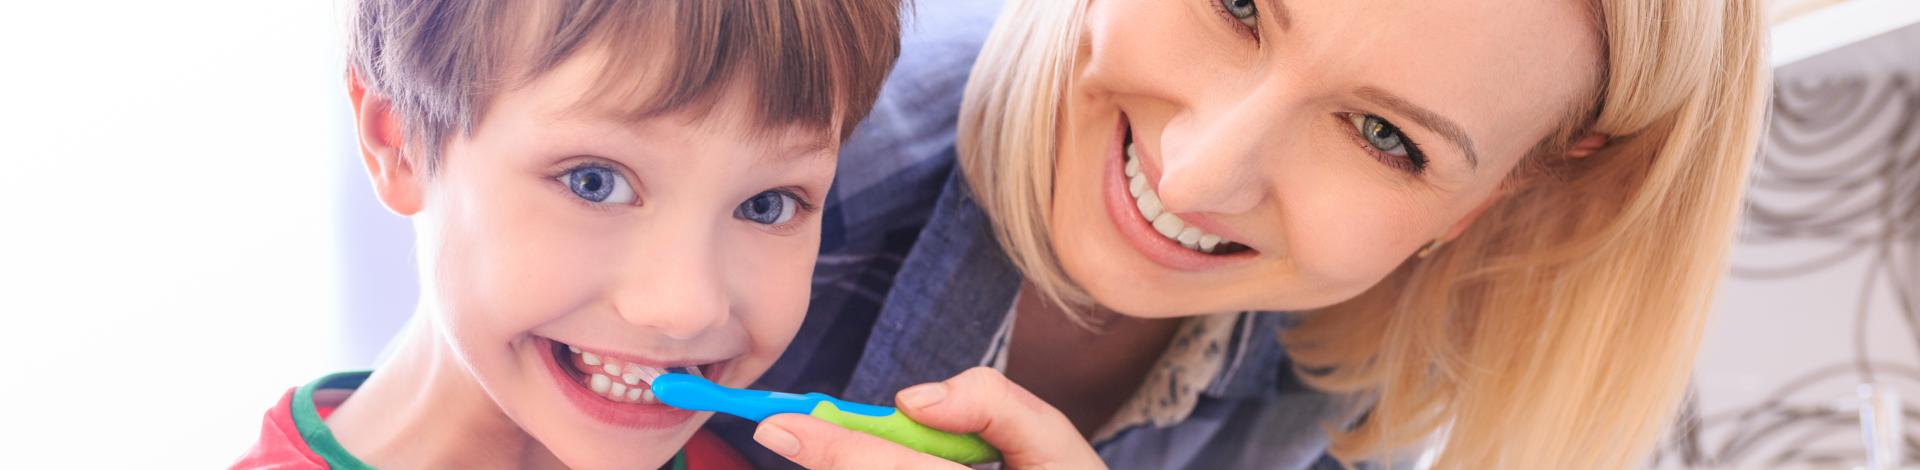 appy-family-mother-child-little-boy-cleans-teeth-with-toothbrush-bathroom